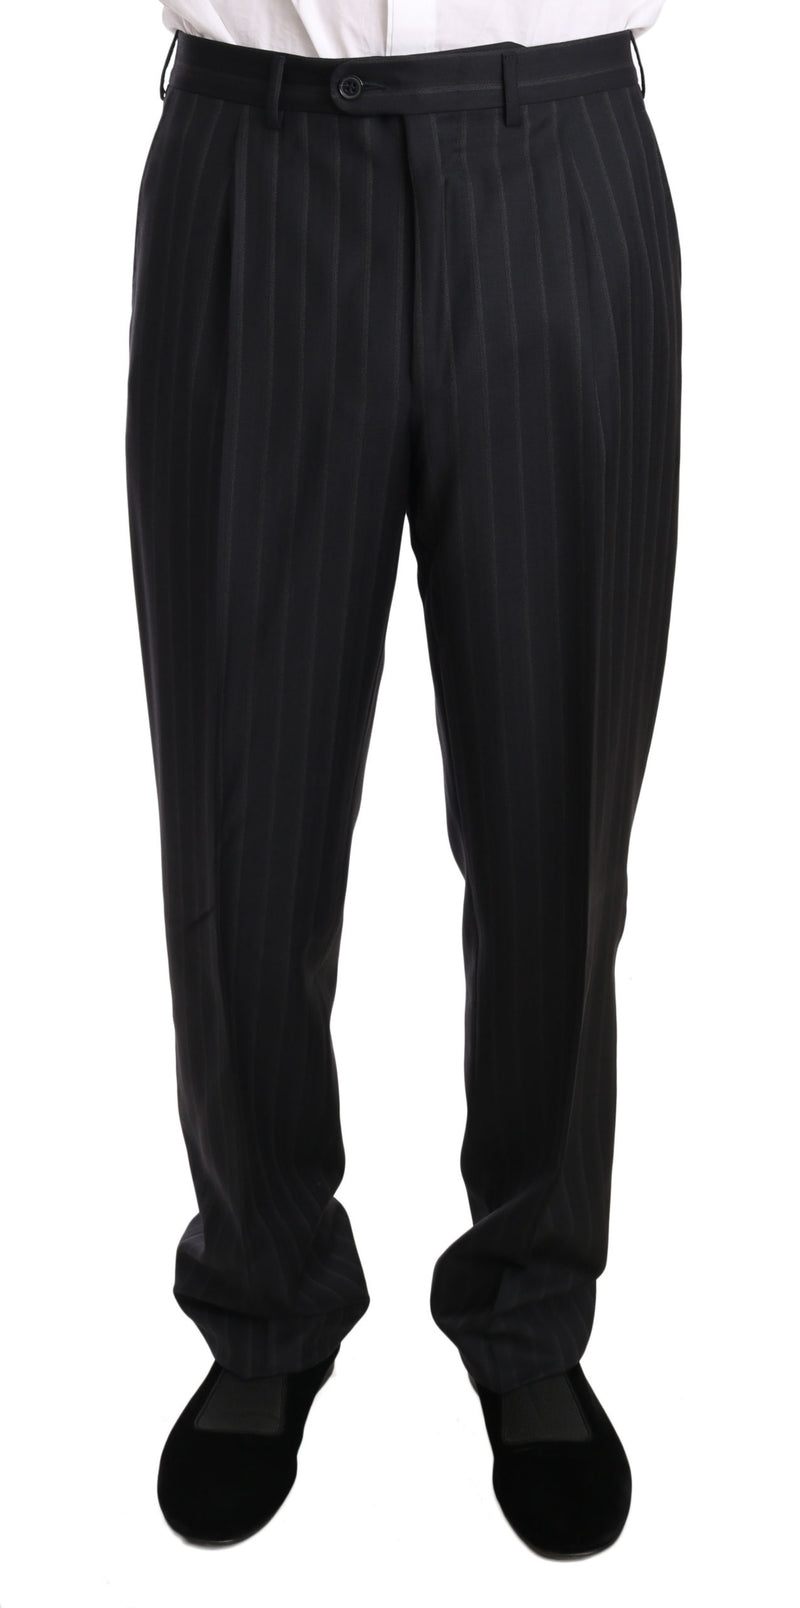 Dark Gray Two Piece 3 Button Wool Striped Suit